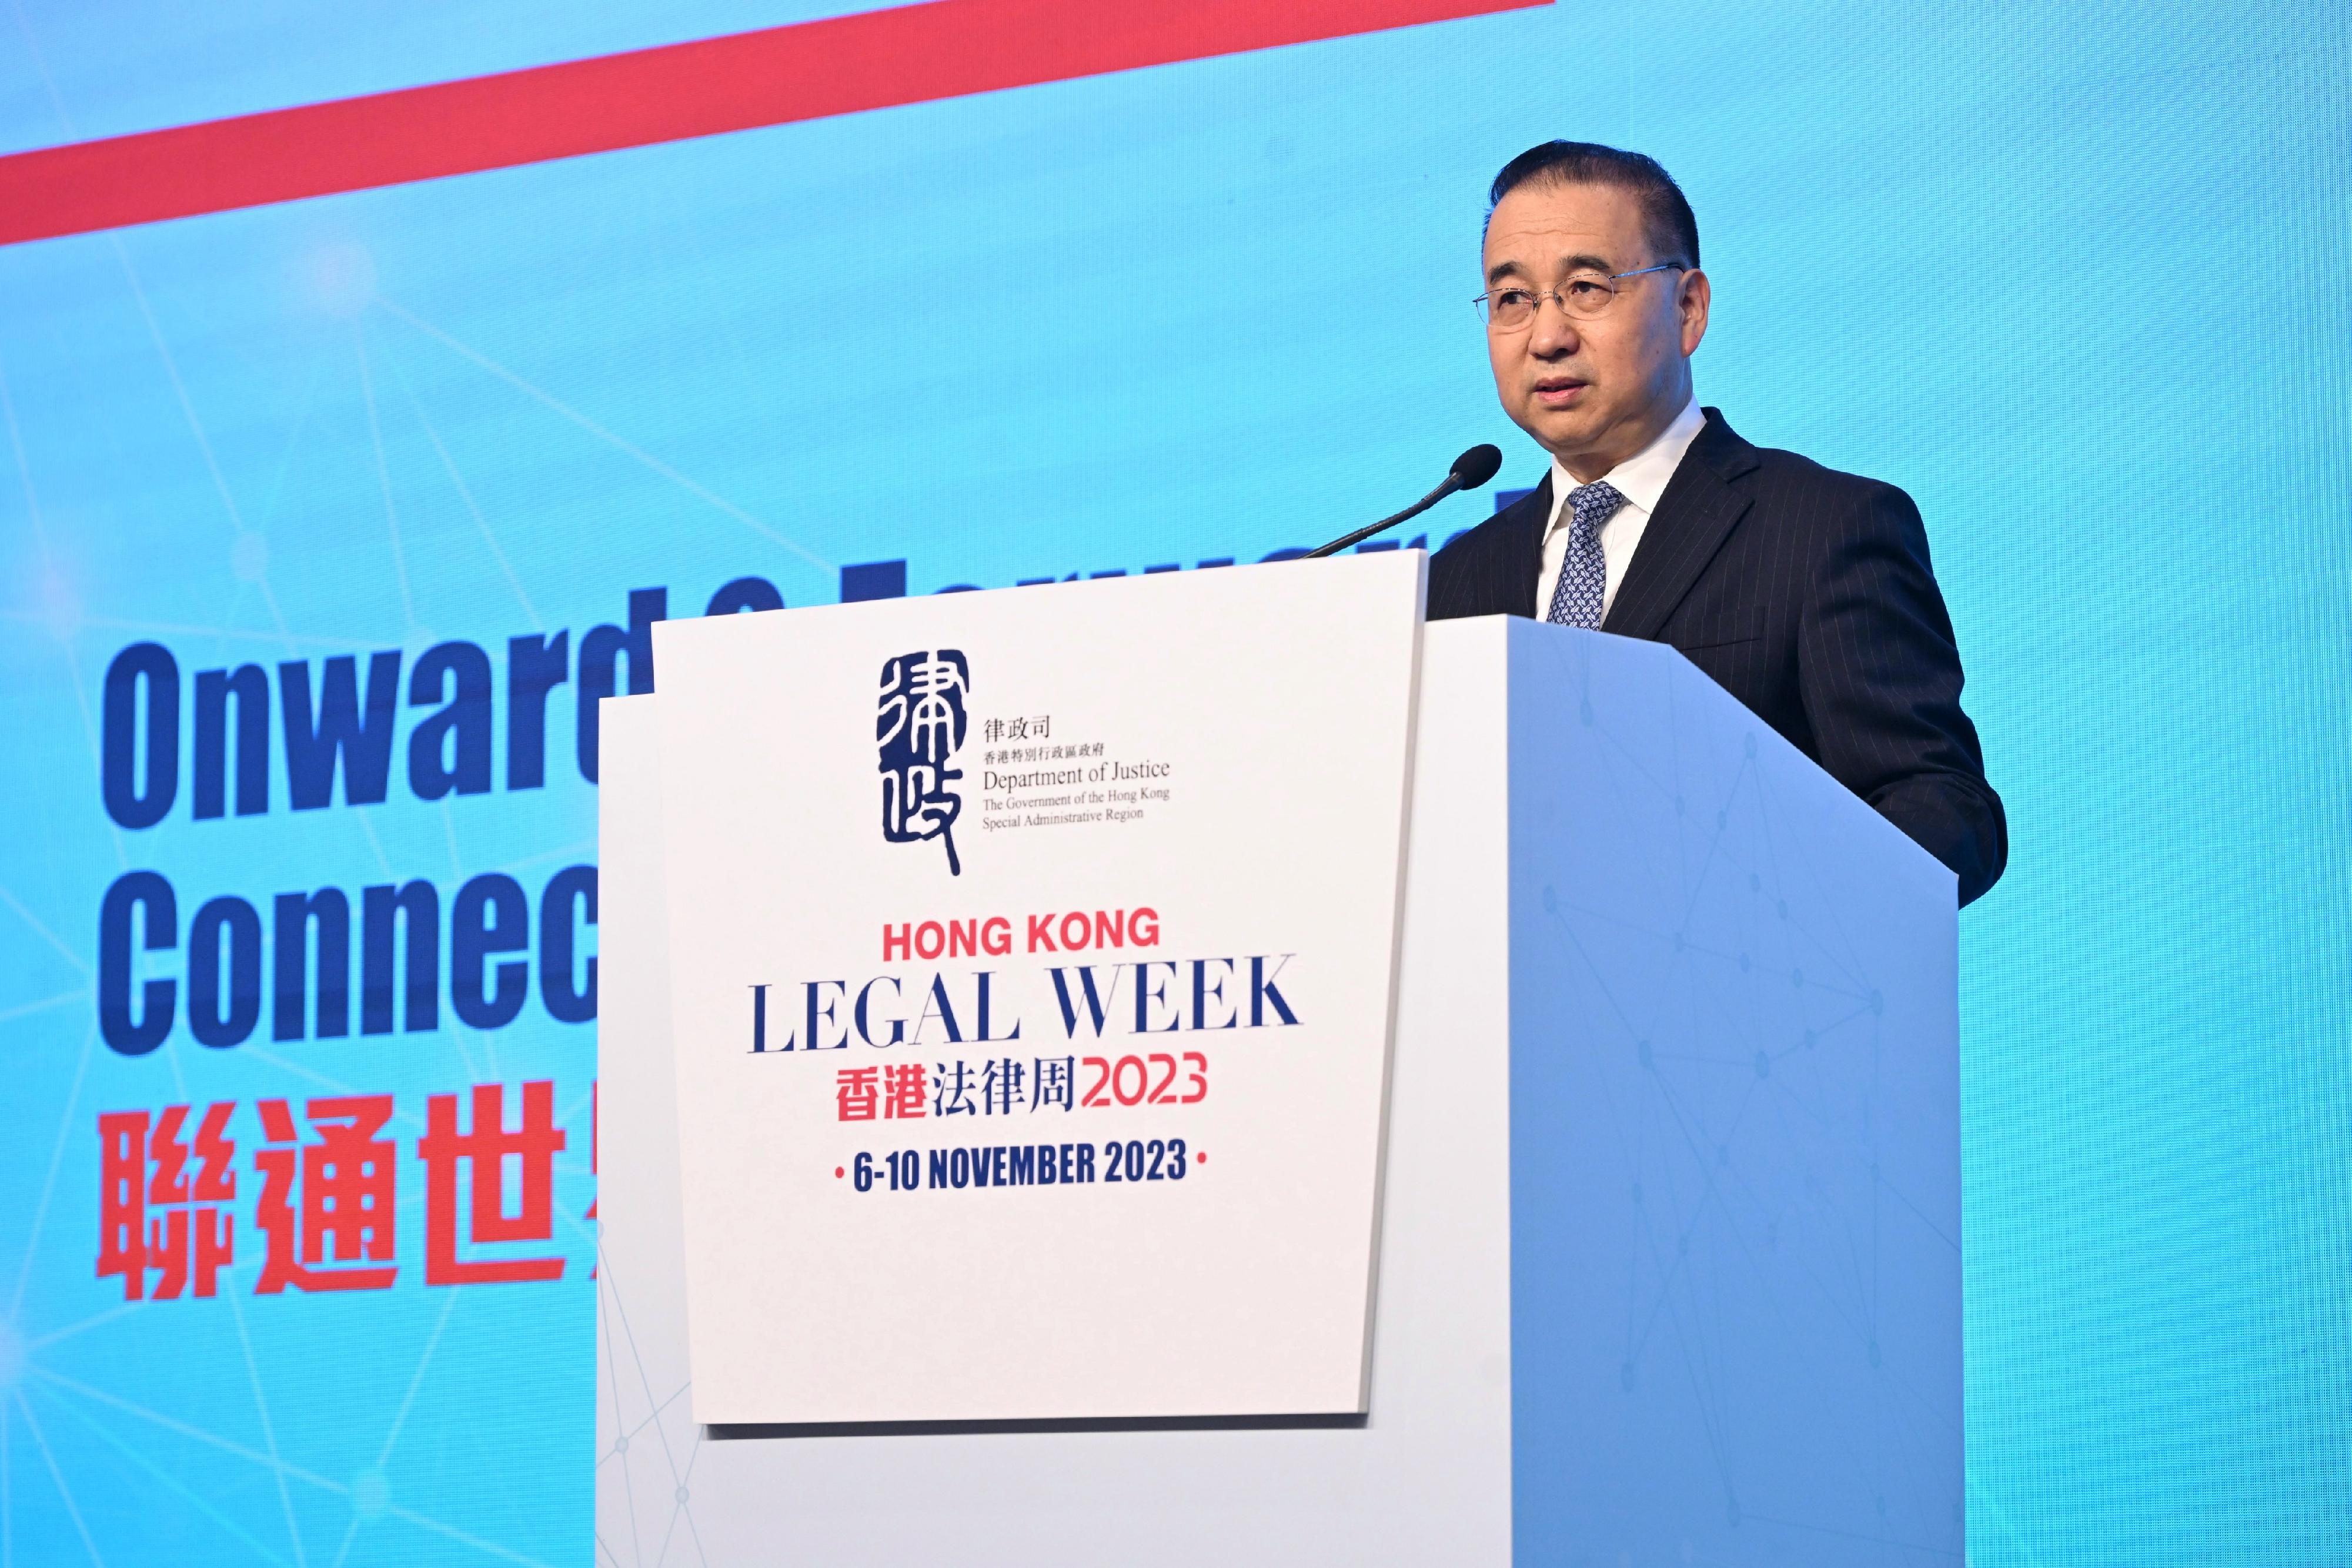 Deputy Director of the Liaison Office of the Central People's Government in the Hong Kong Special Administrative Region Mr Liu Guangyuan speaks at Hong Kong Legal Week 2023: Rule of Law for the Future this morning (November 10).

